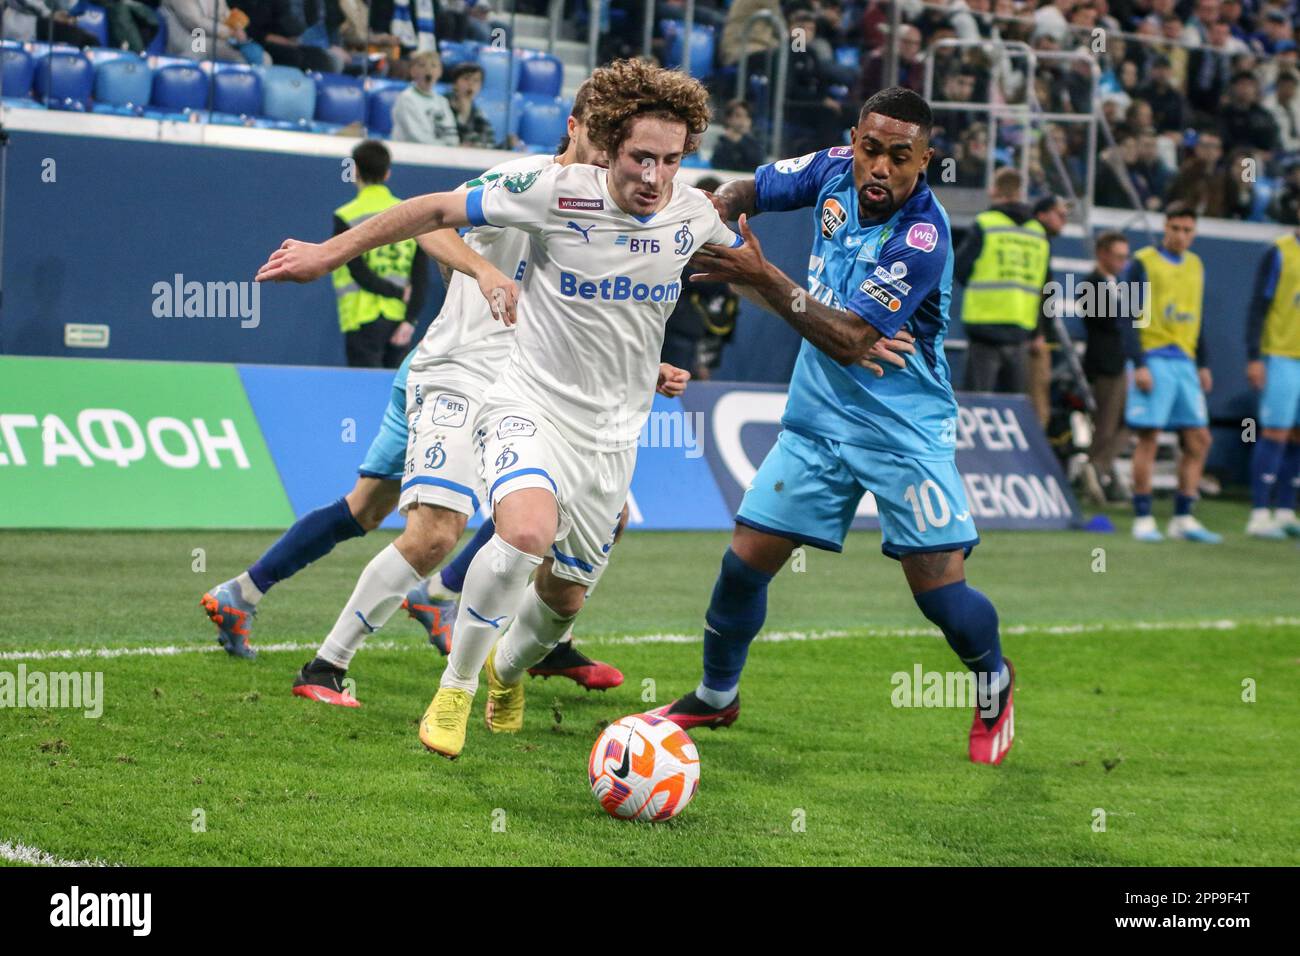 Saint Petersburg, Russia. 22nd Apr, 2023. Luka Gagnidze (No.34) of Dynamo and Malcom Filipe Silva de Oliveira, commonly known as Malcom (No.10) of Zenit in action during the Russian Premier League football match between Zenit Saint Petersburg and Dynamo Moscow at Gazprom Arena. Zenit 3:1 Dynamo. Credit: SOPA Images Limited/Alamy Live News Stock Photo